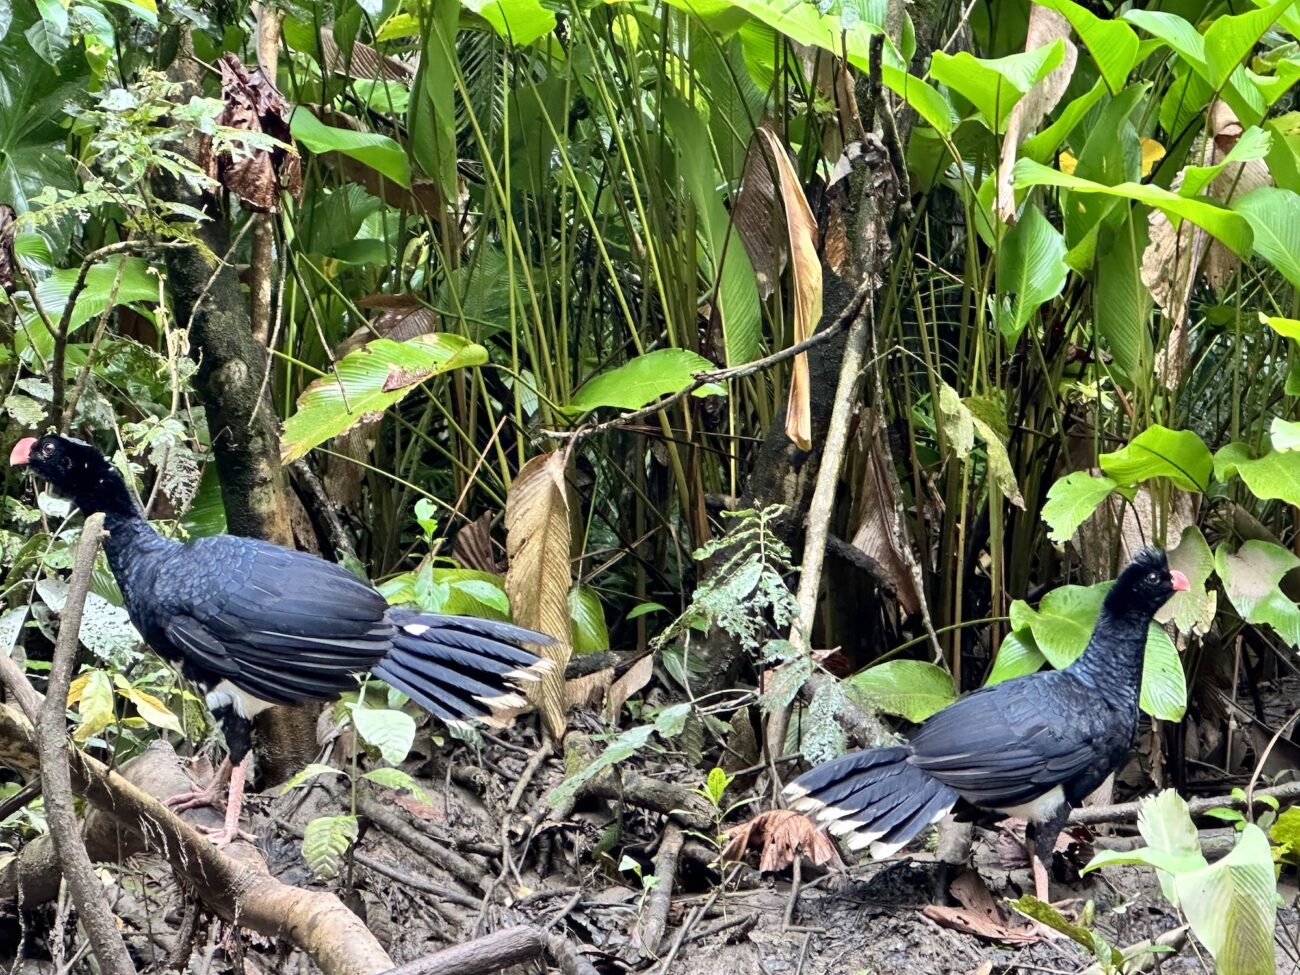 Two black birds sit in front of plants in the Amazon rainforest.